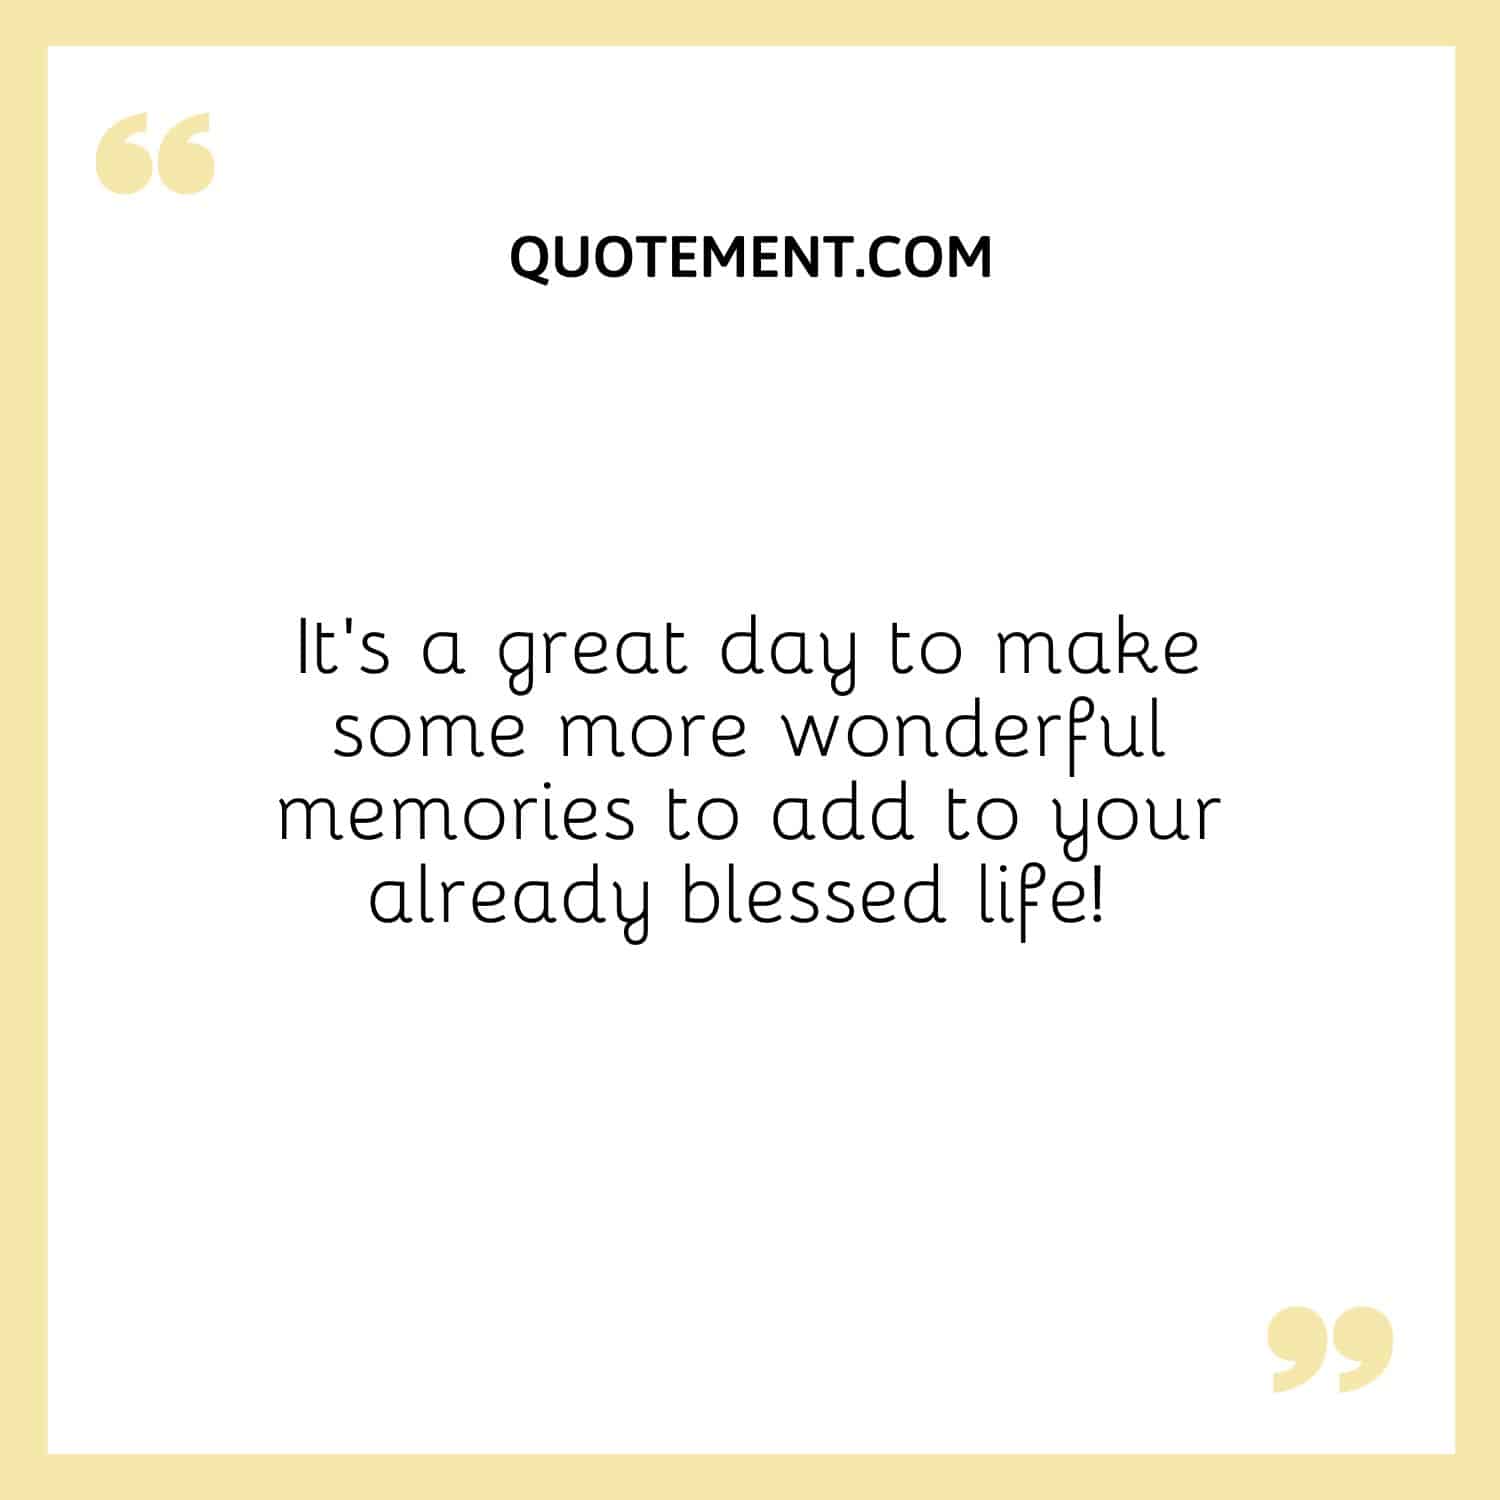 It’s a great day to make some more wonderful memories to add to your already blessed life